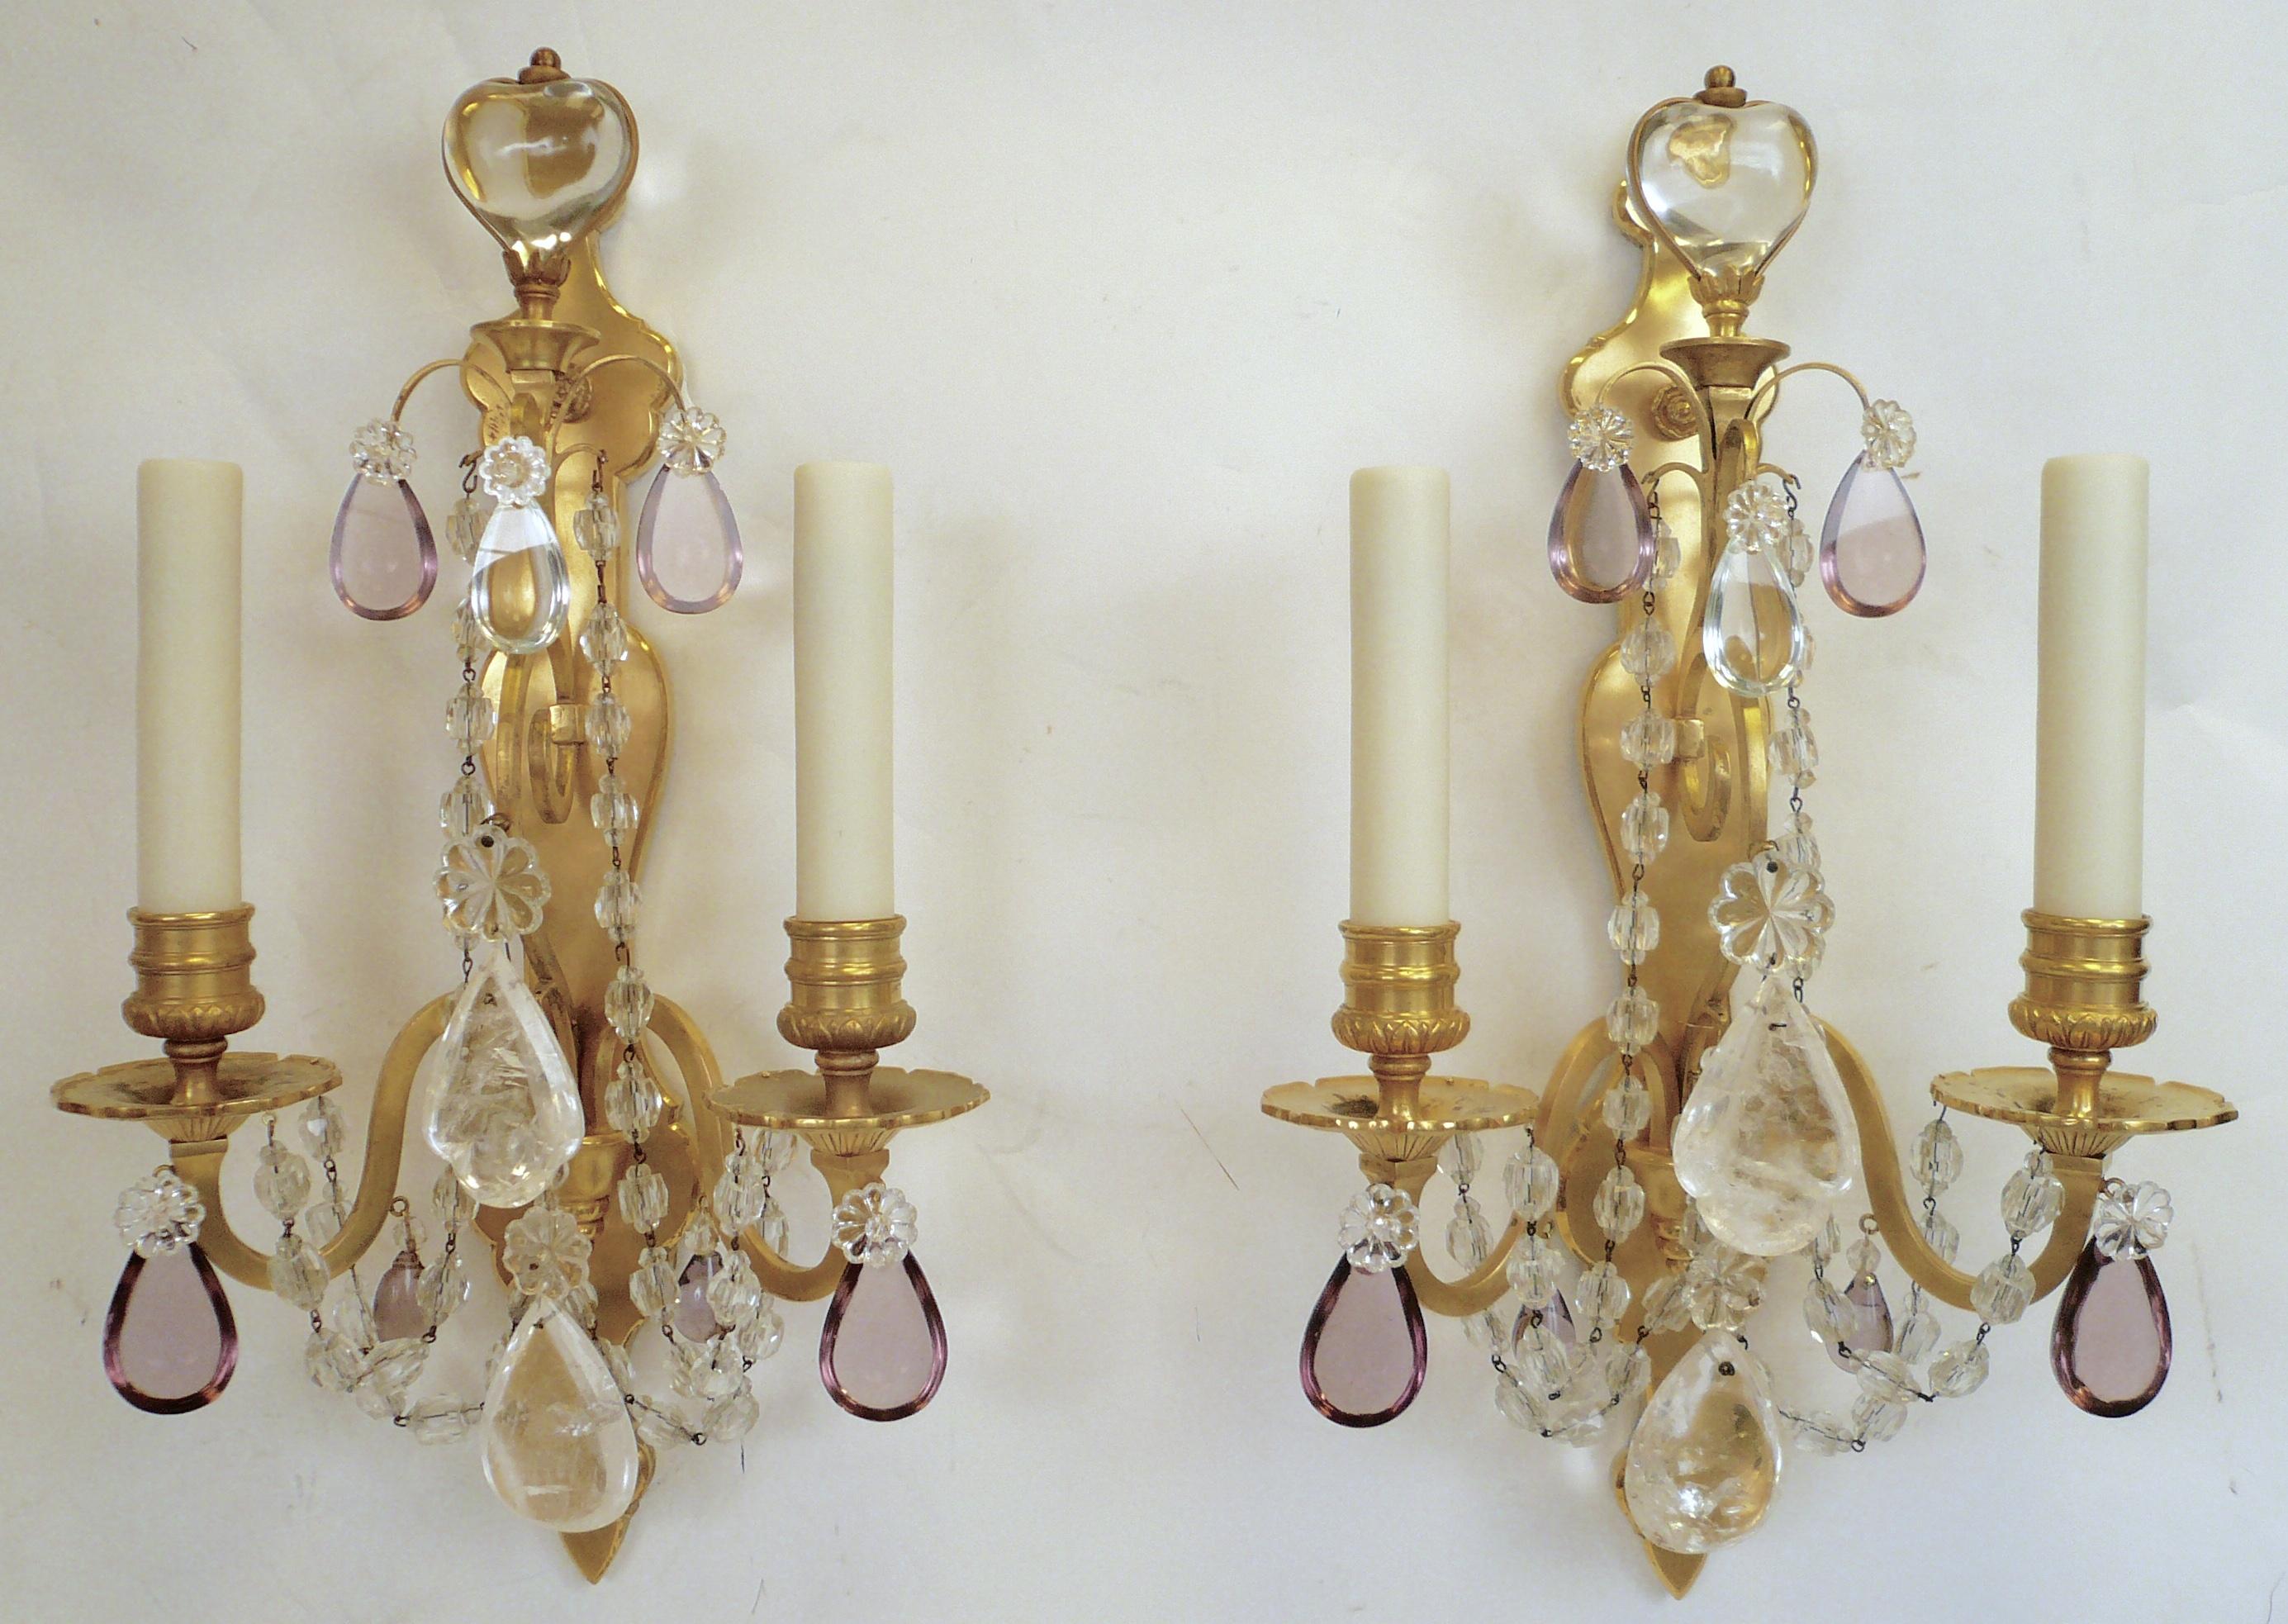 Pair of French Gilt Bronze Sconces with Rock Crystal and Amethyst Prisms For Sale 6